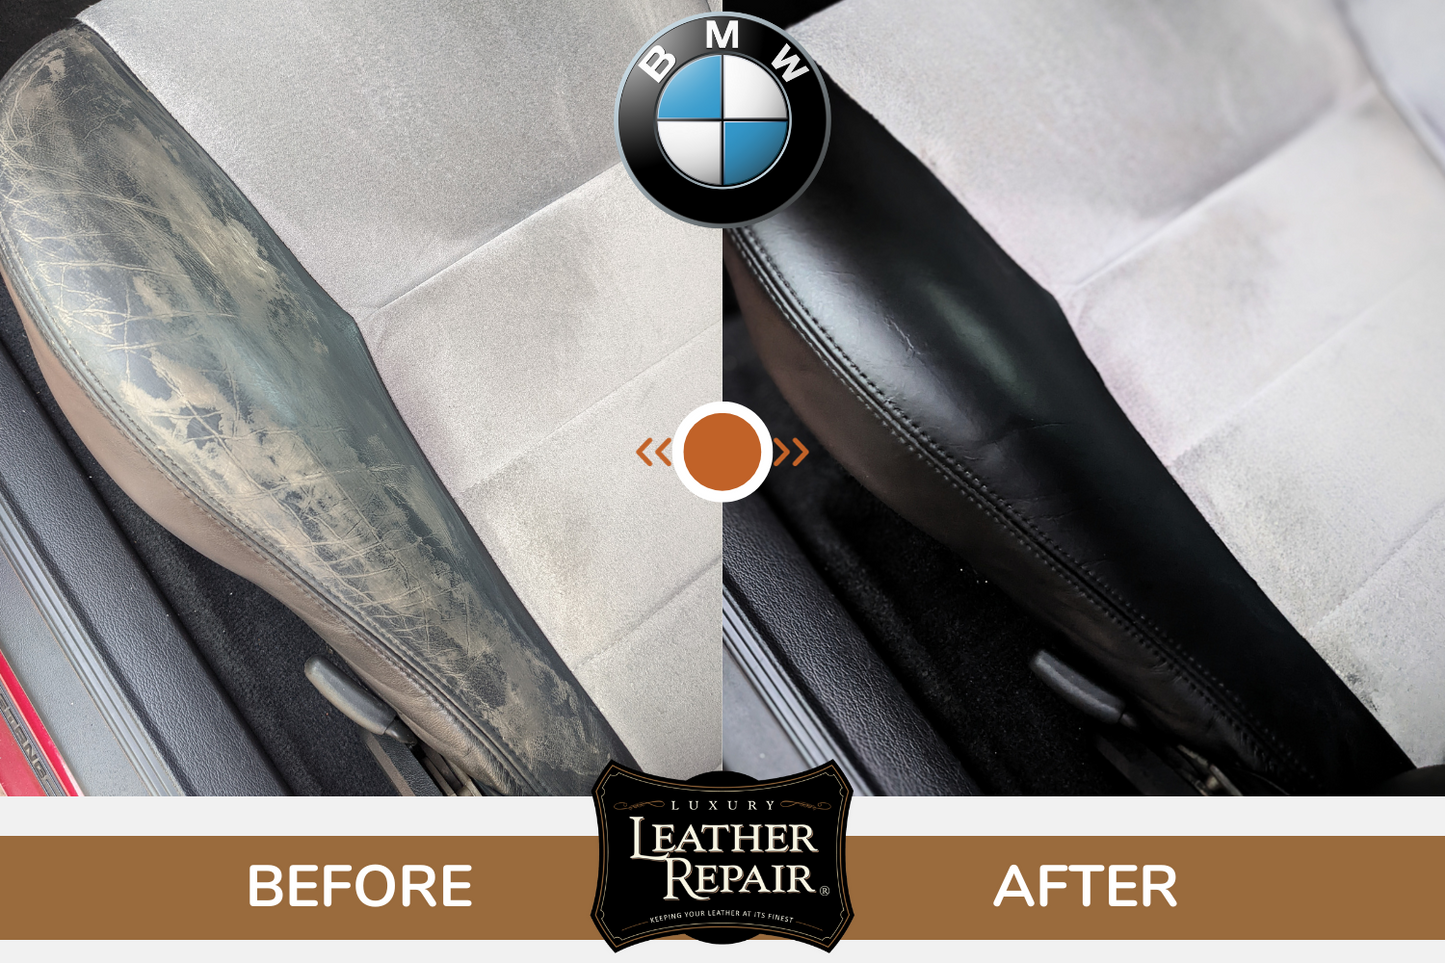 BMW Leather and Vinyl Interior Dye Kit - with BMW Soft Feel